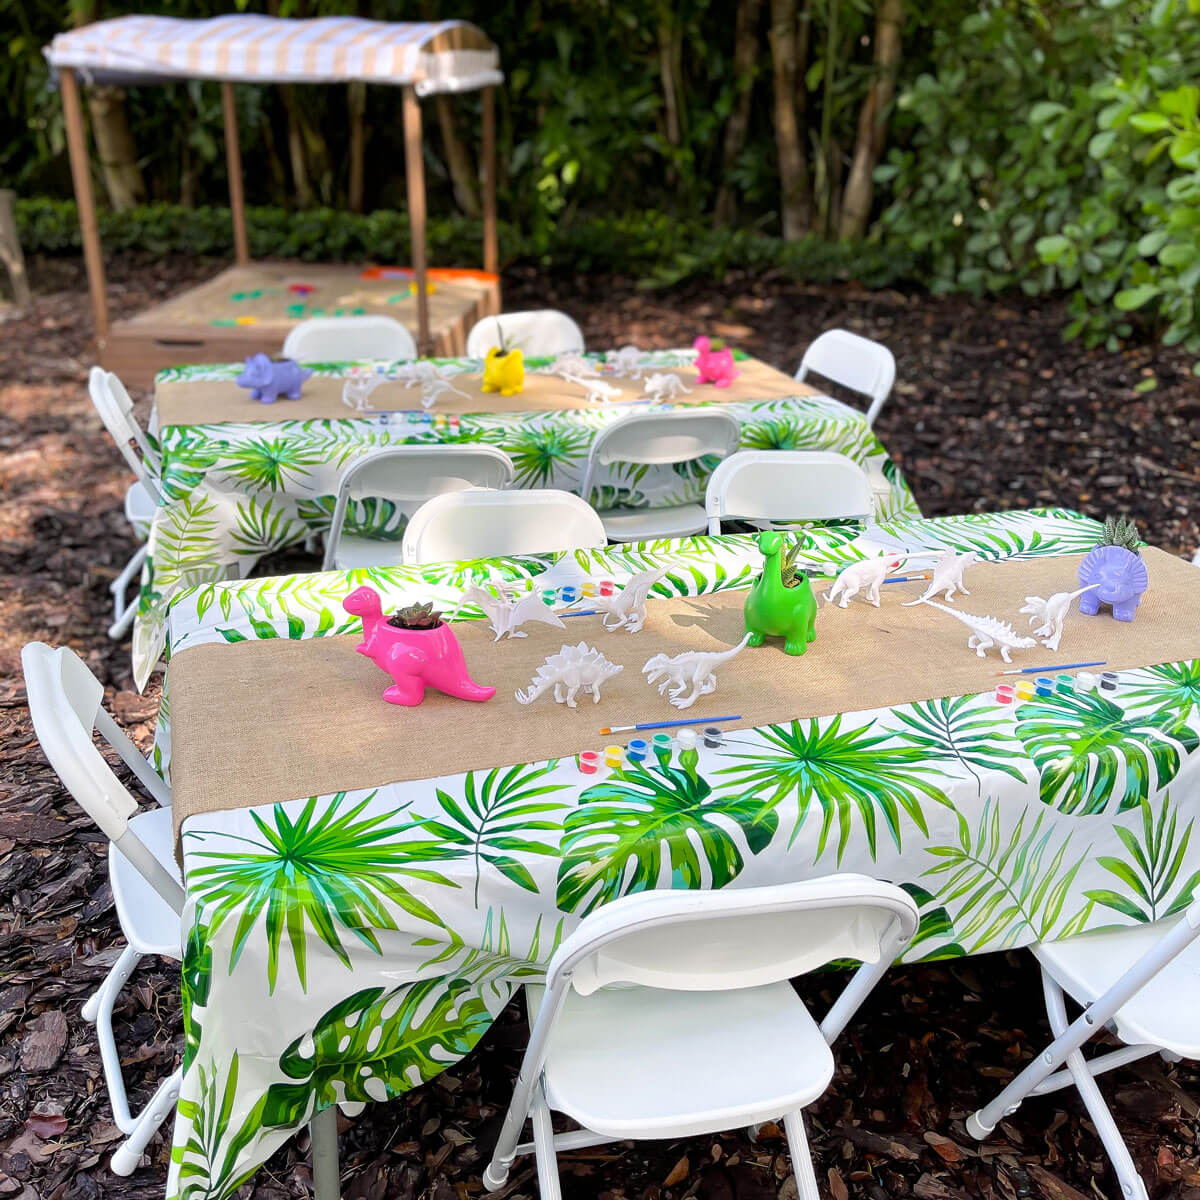 dinosaur party theme for kids ideas and inspiration